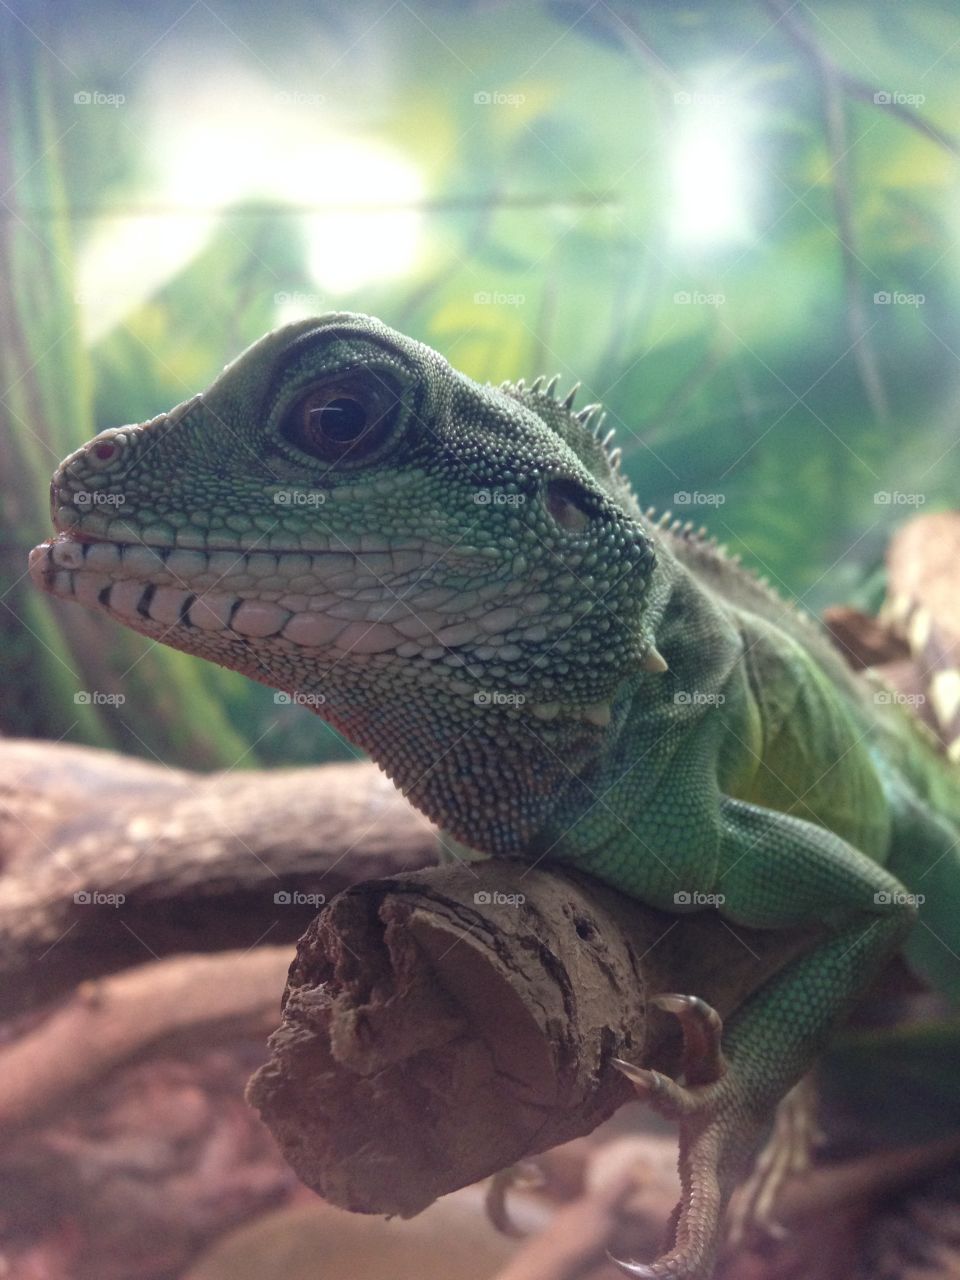 Green reptile looking at you!